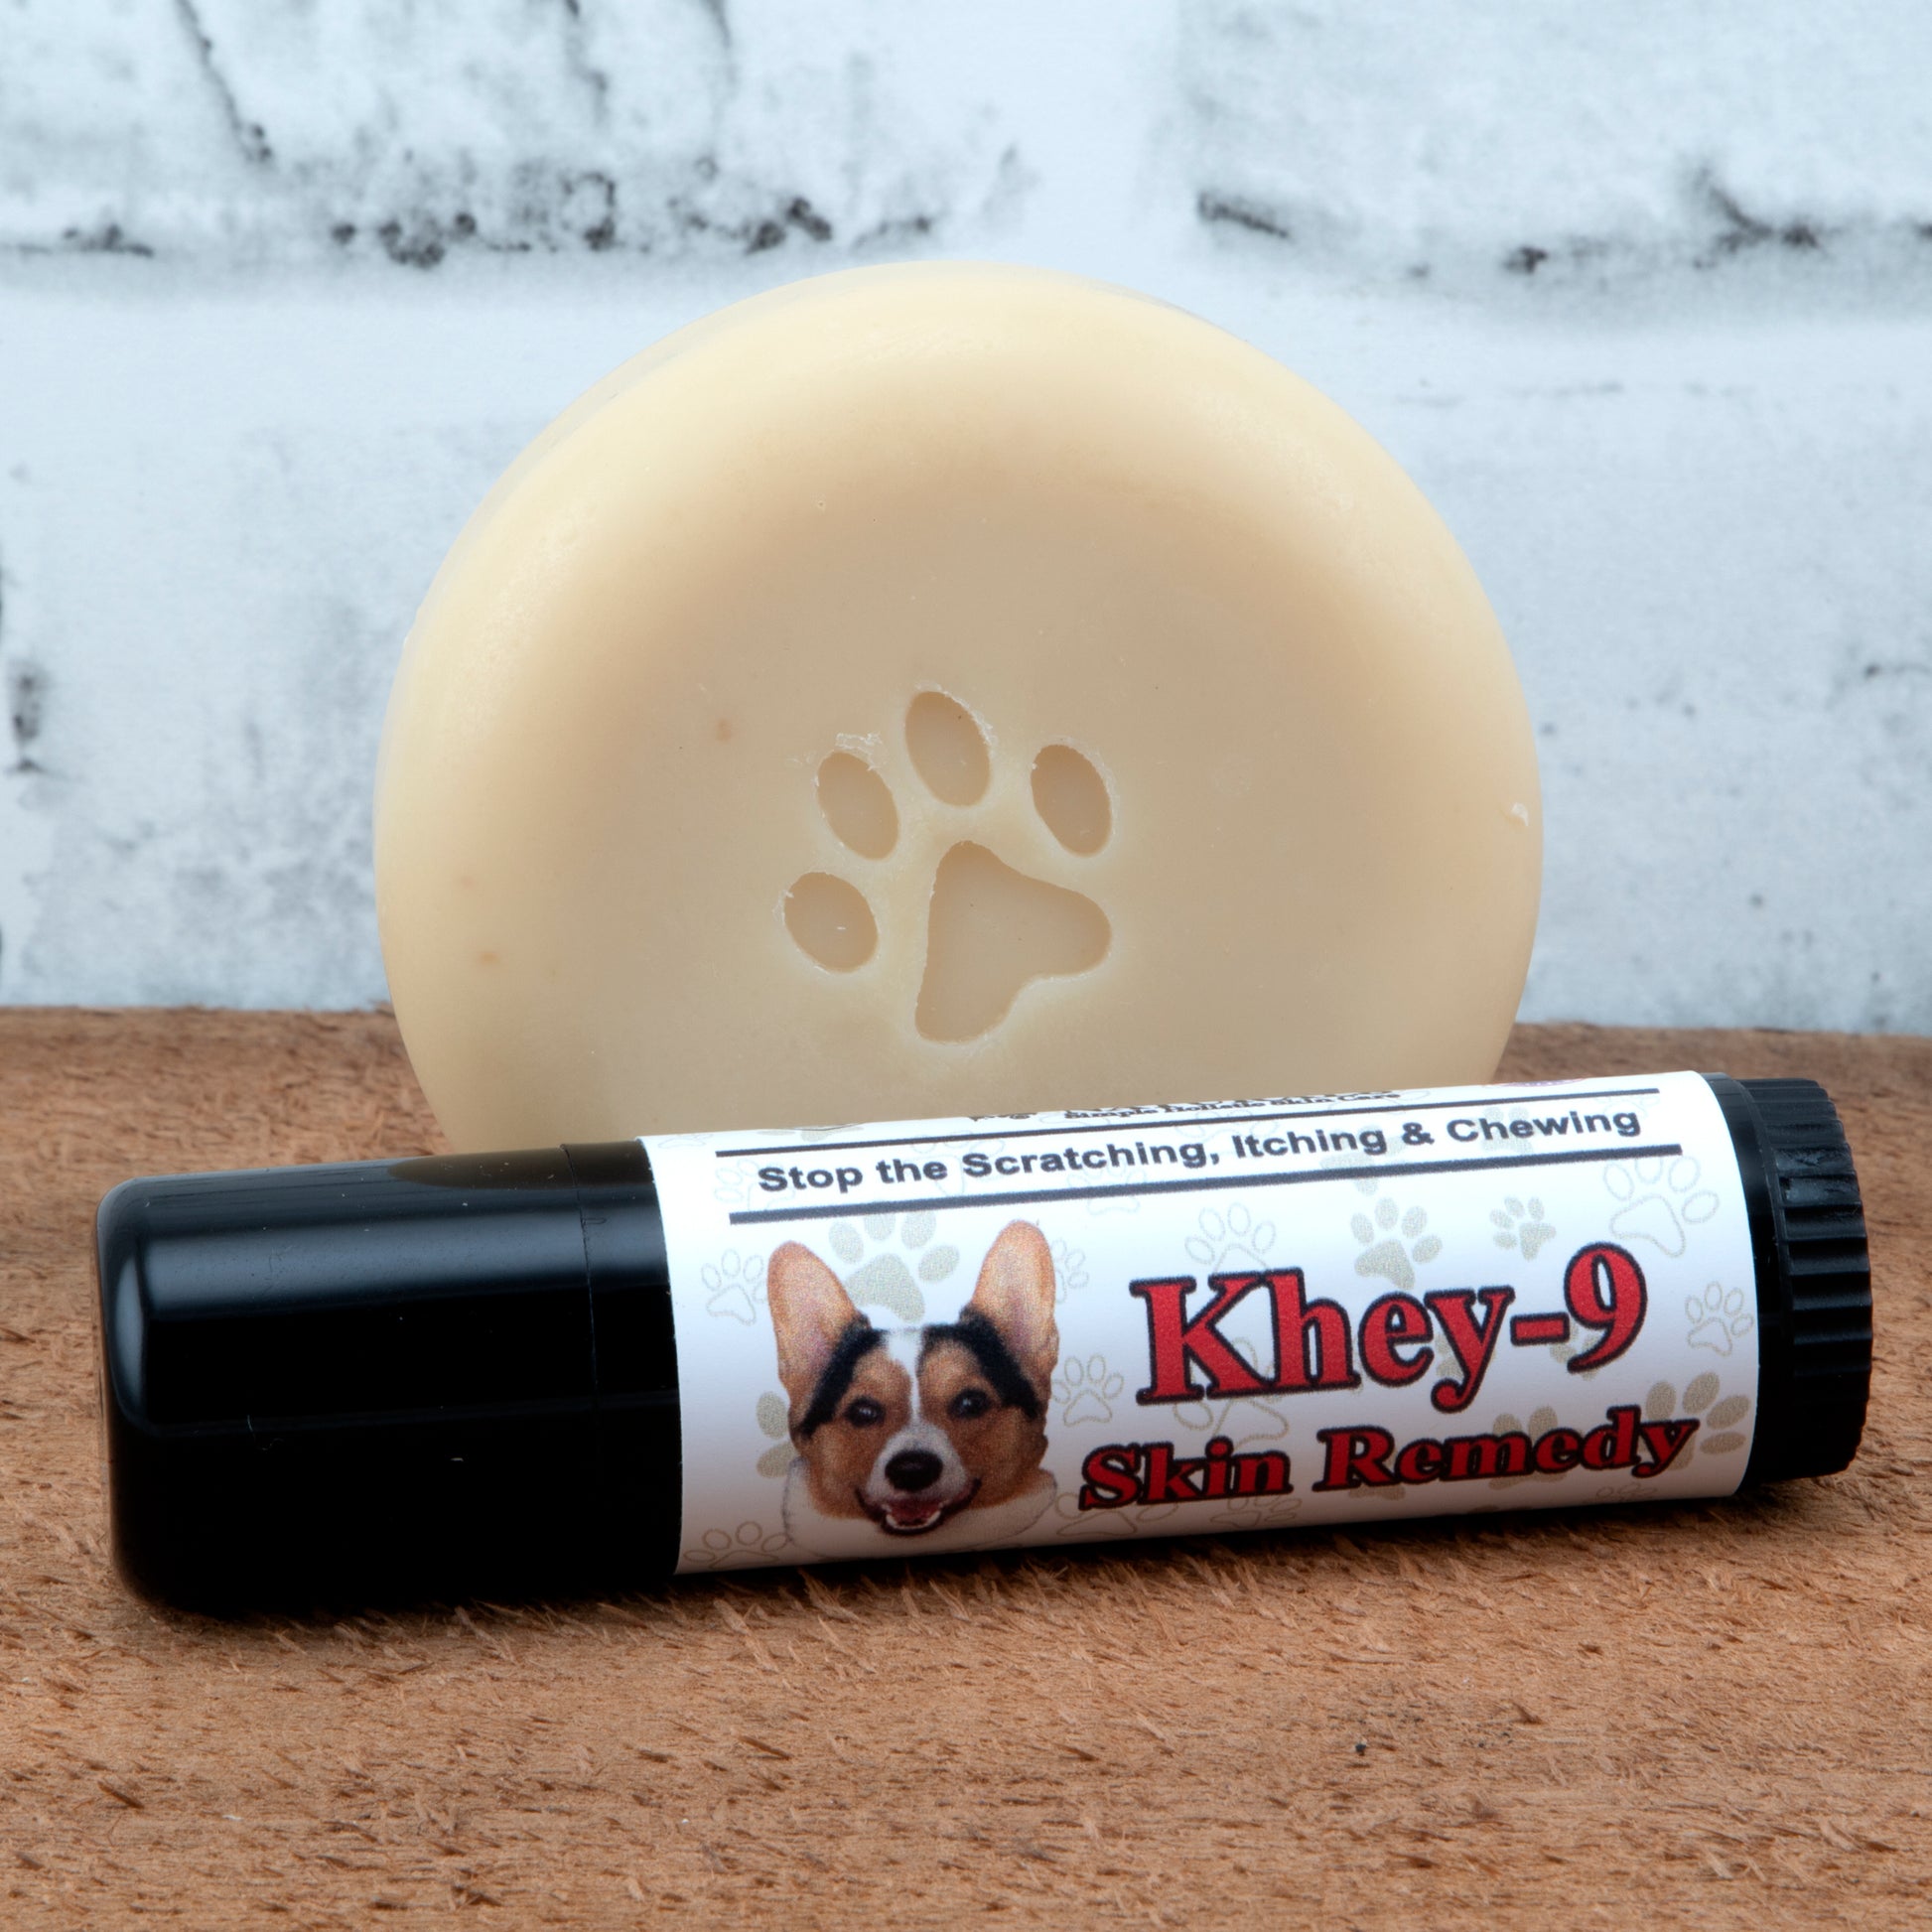 The new Khey-9 is safe for dogs AND their human! ﻿﻿Formulated to hydrate your canine companion's dry, itchy skin and soothe common skin conditions caused by seasonal allergies.